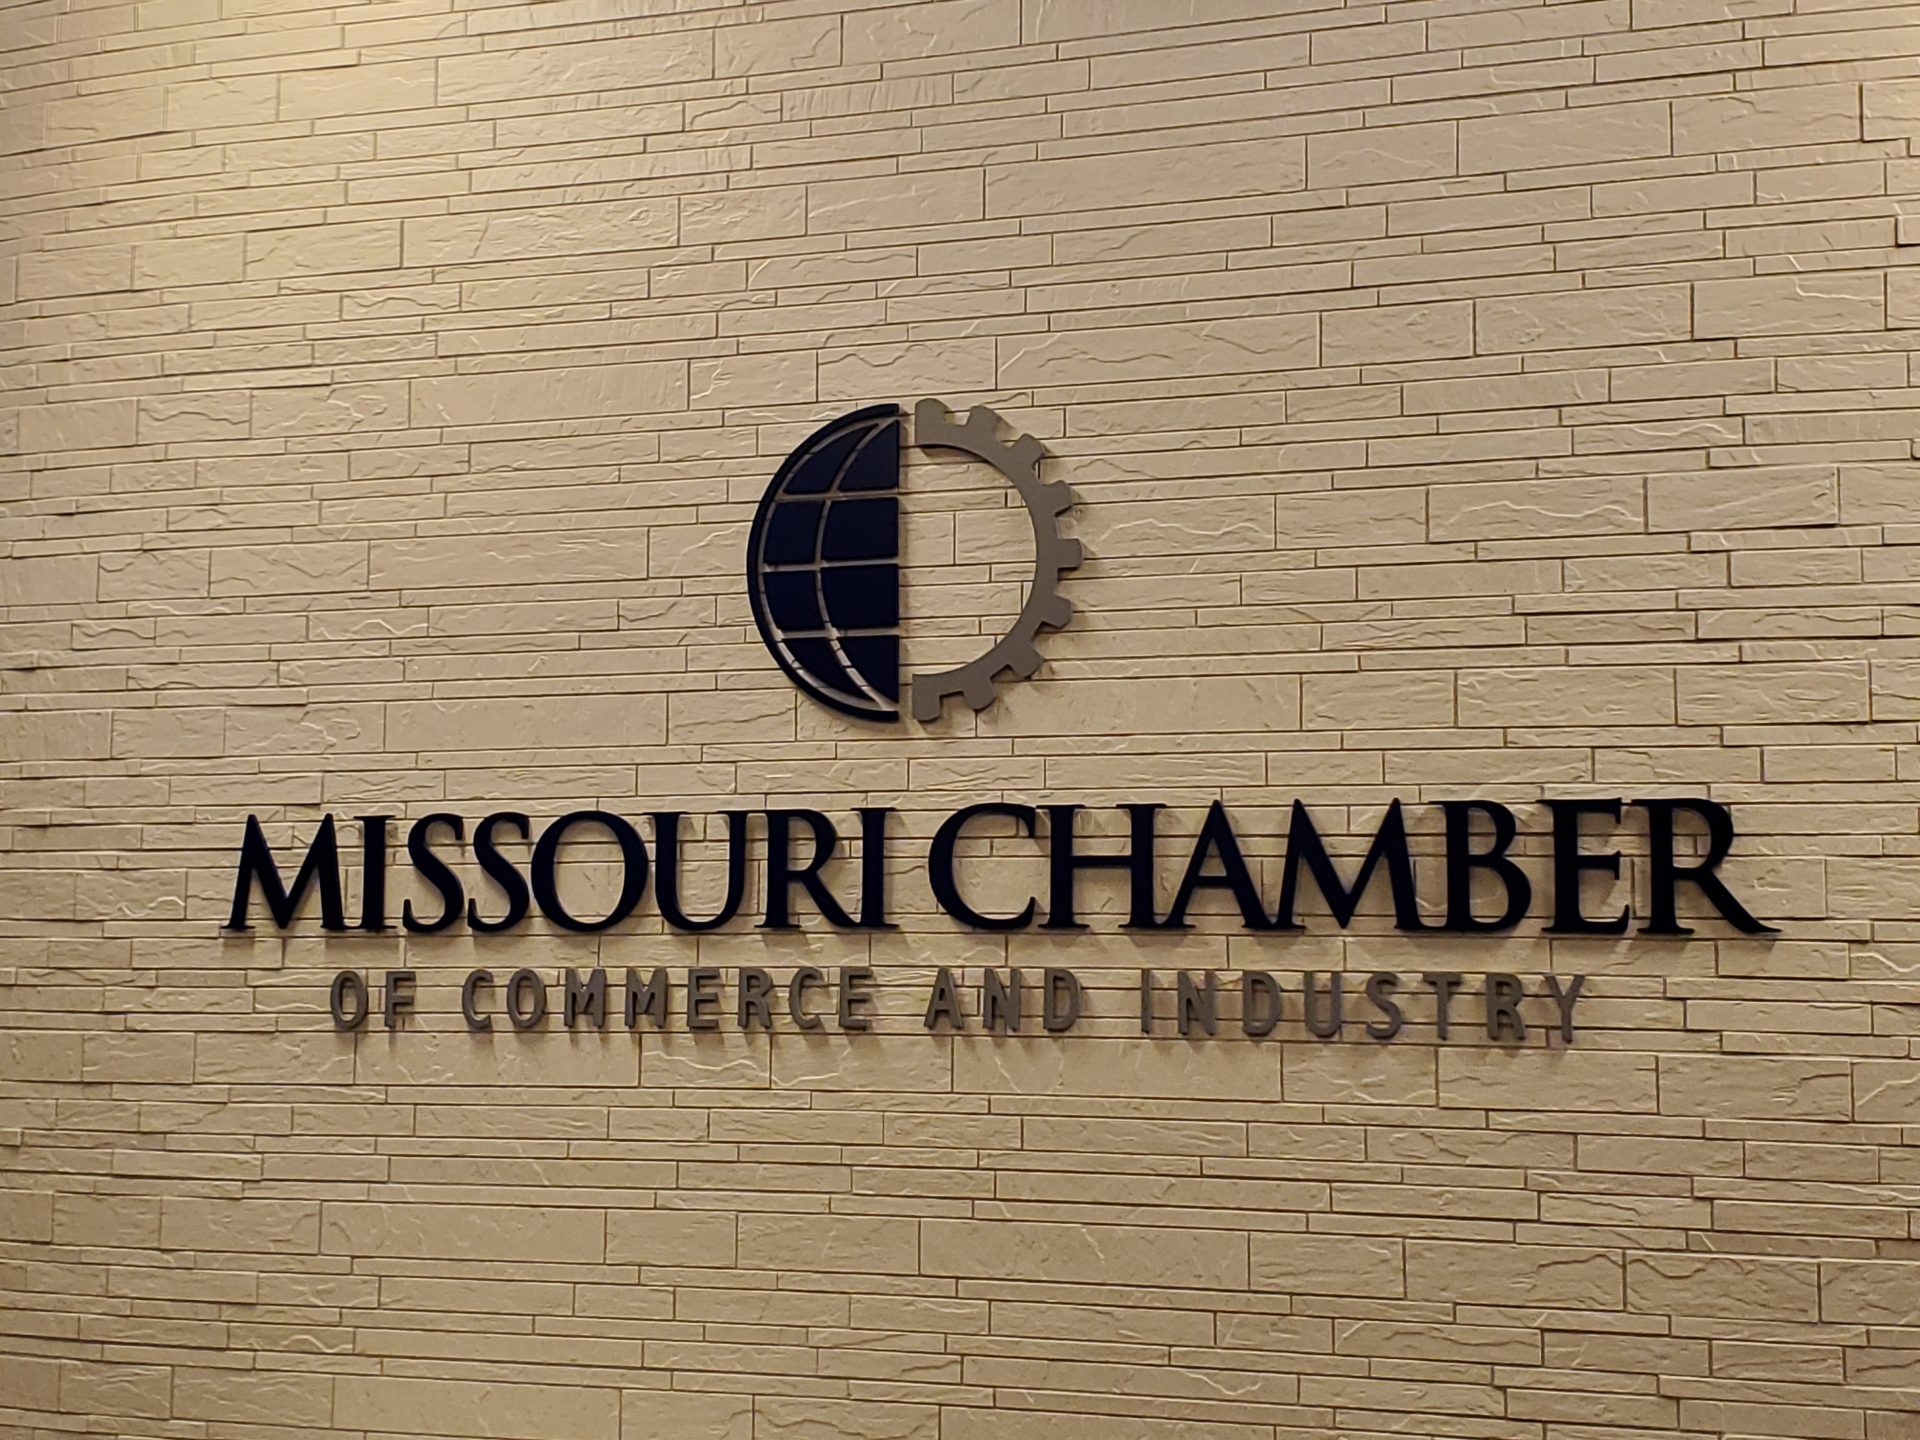 (LISTEN): Child care tax credits remain a top priority for Missouri Chamber leaders